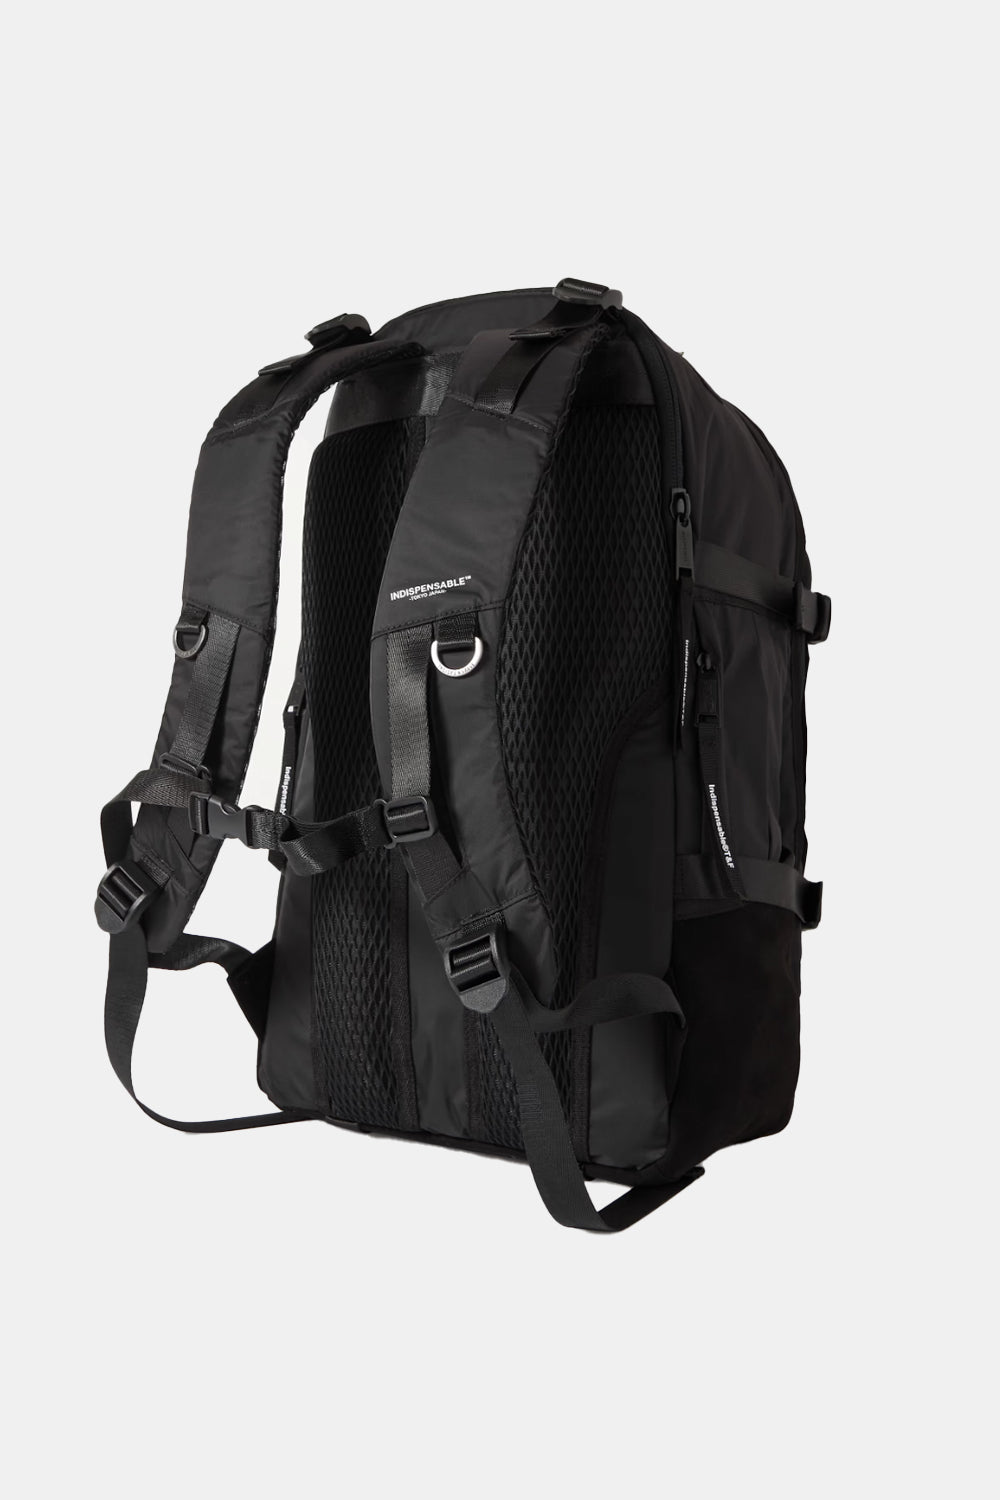 Indispensable IDP Backpack Brill Econyl (Black)